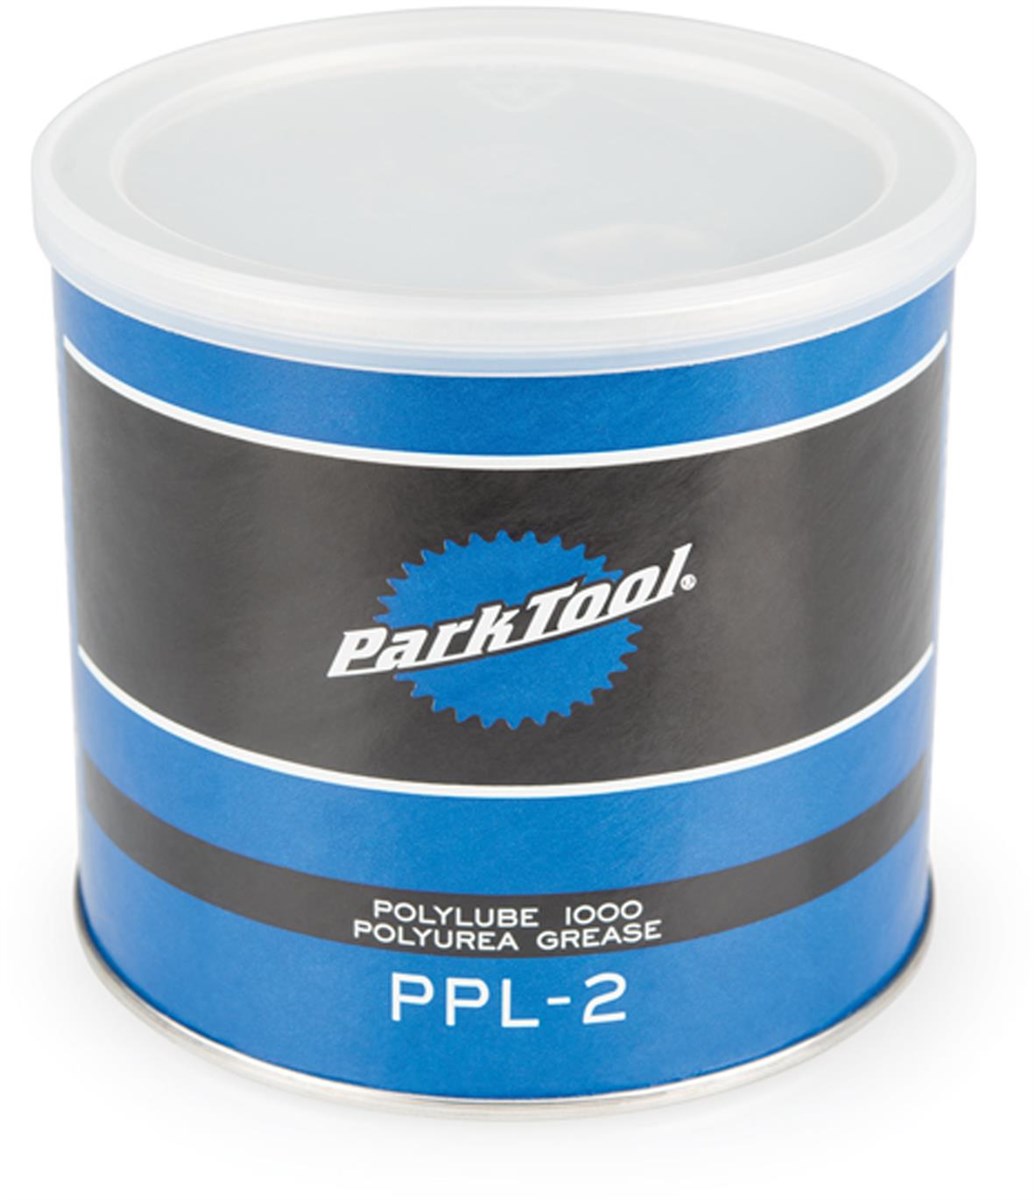 Park Tool PPL2 - Polylube 1000 Grease 1 LB Tub